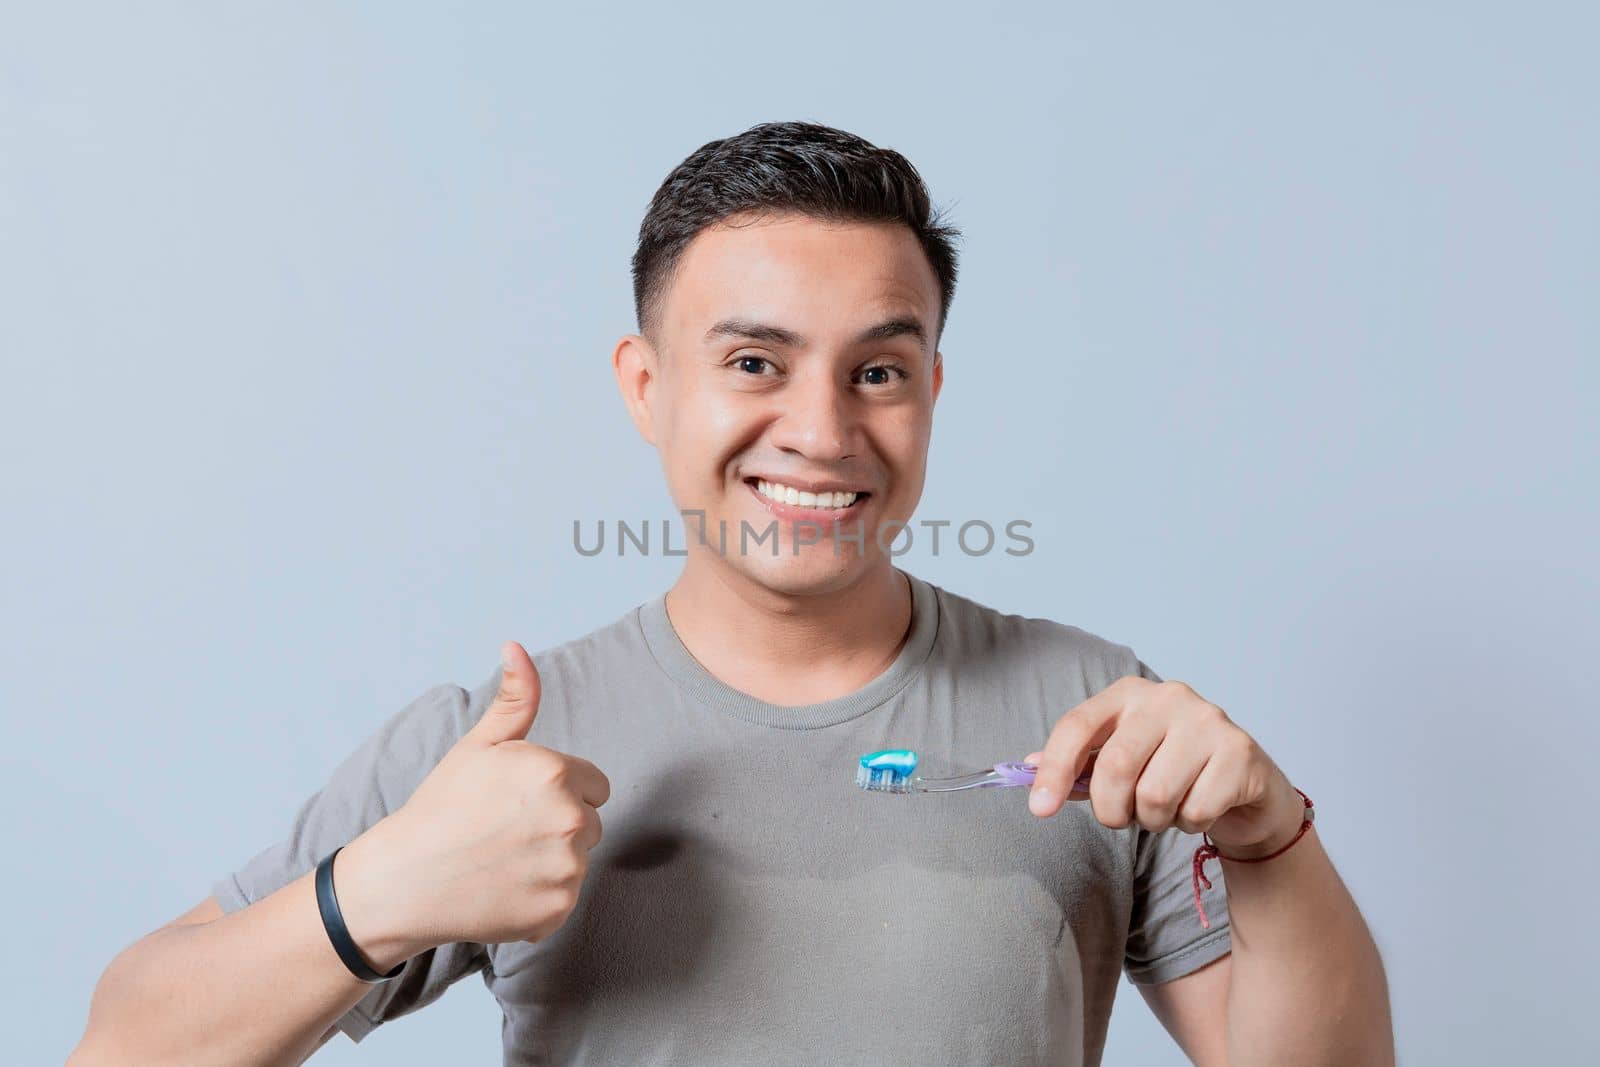 Smiling handsome guy holding a toothbrush with thumb up. Smiling people holding toothbrush with thumbs up gesture, Young man holding a toothbrush with thumb up isolated by isaiphoto